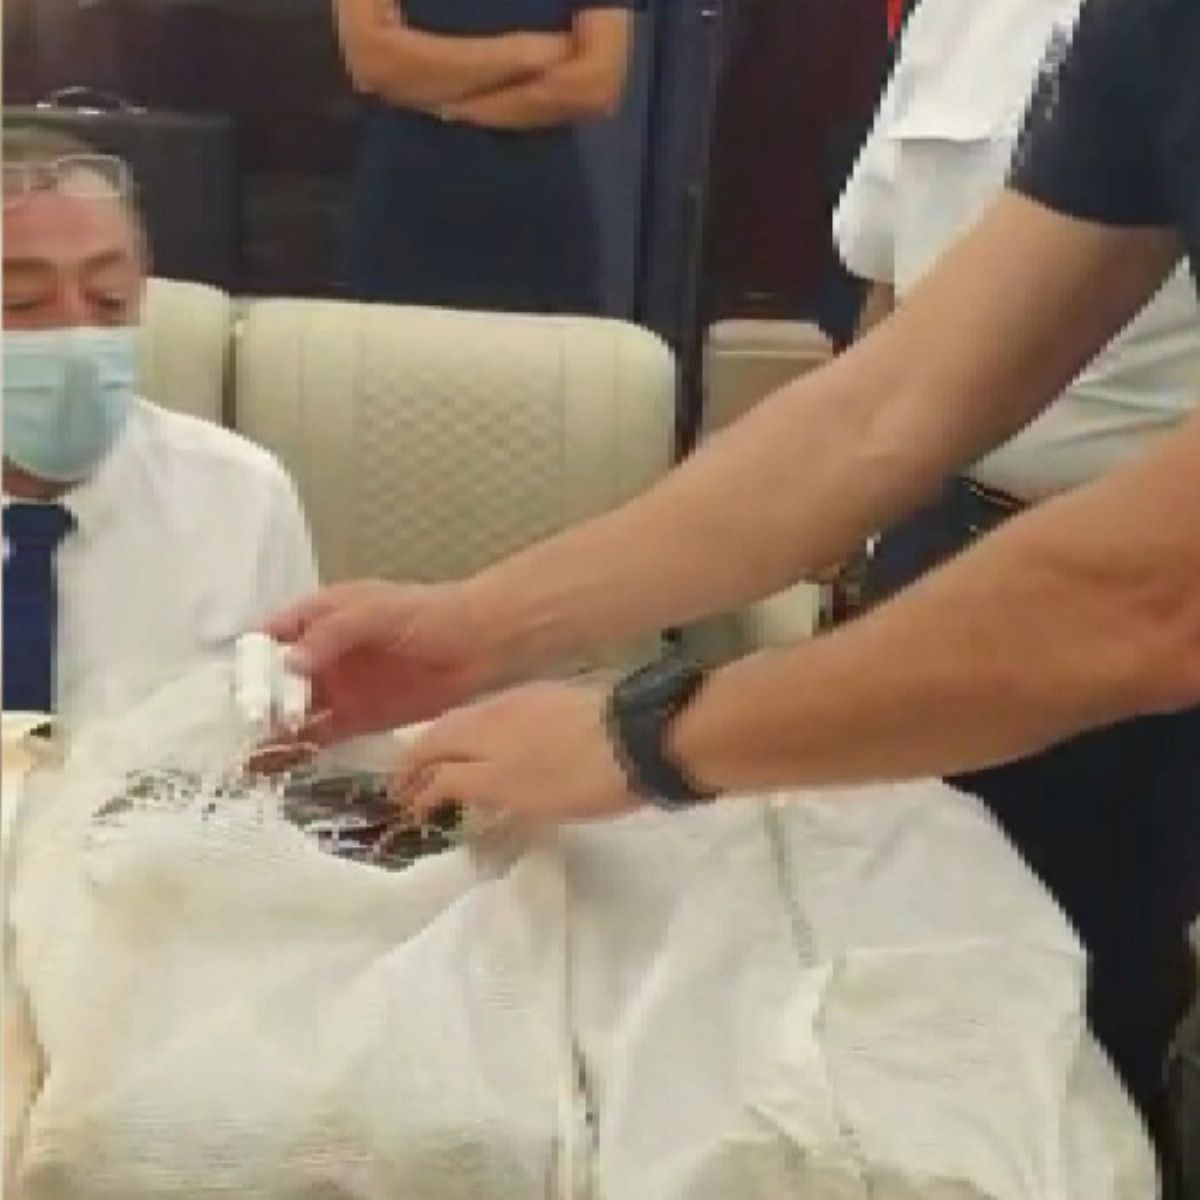 Drugs found in a jet that Turkish firm rented to a Spanish-born person #3